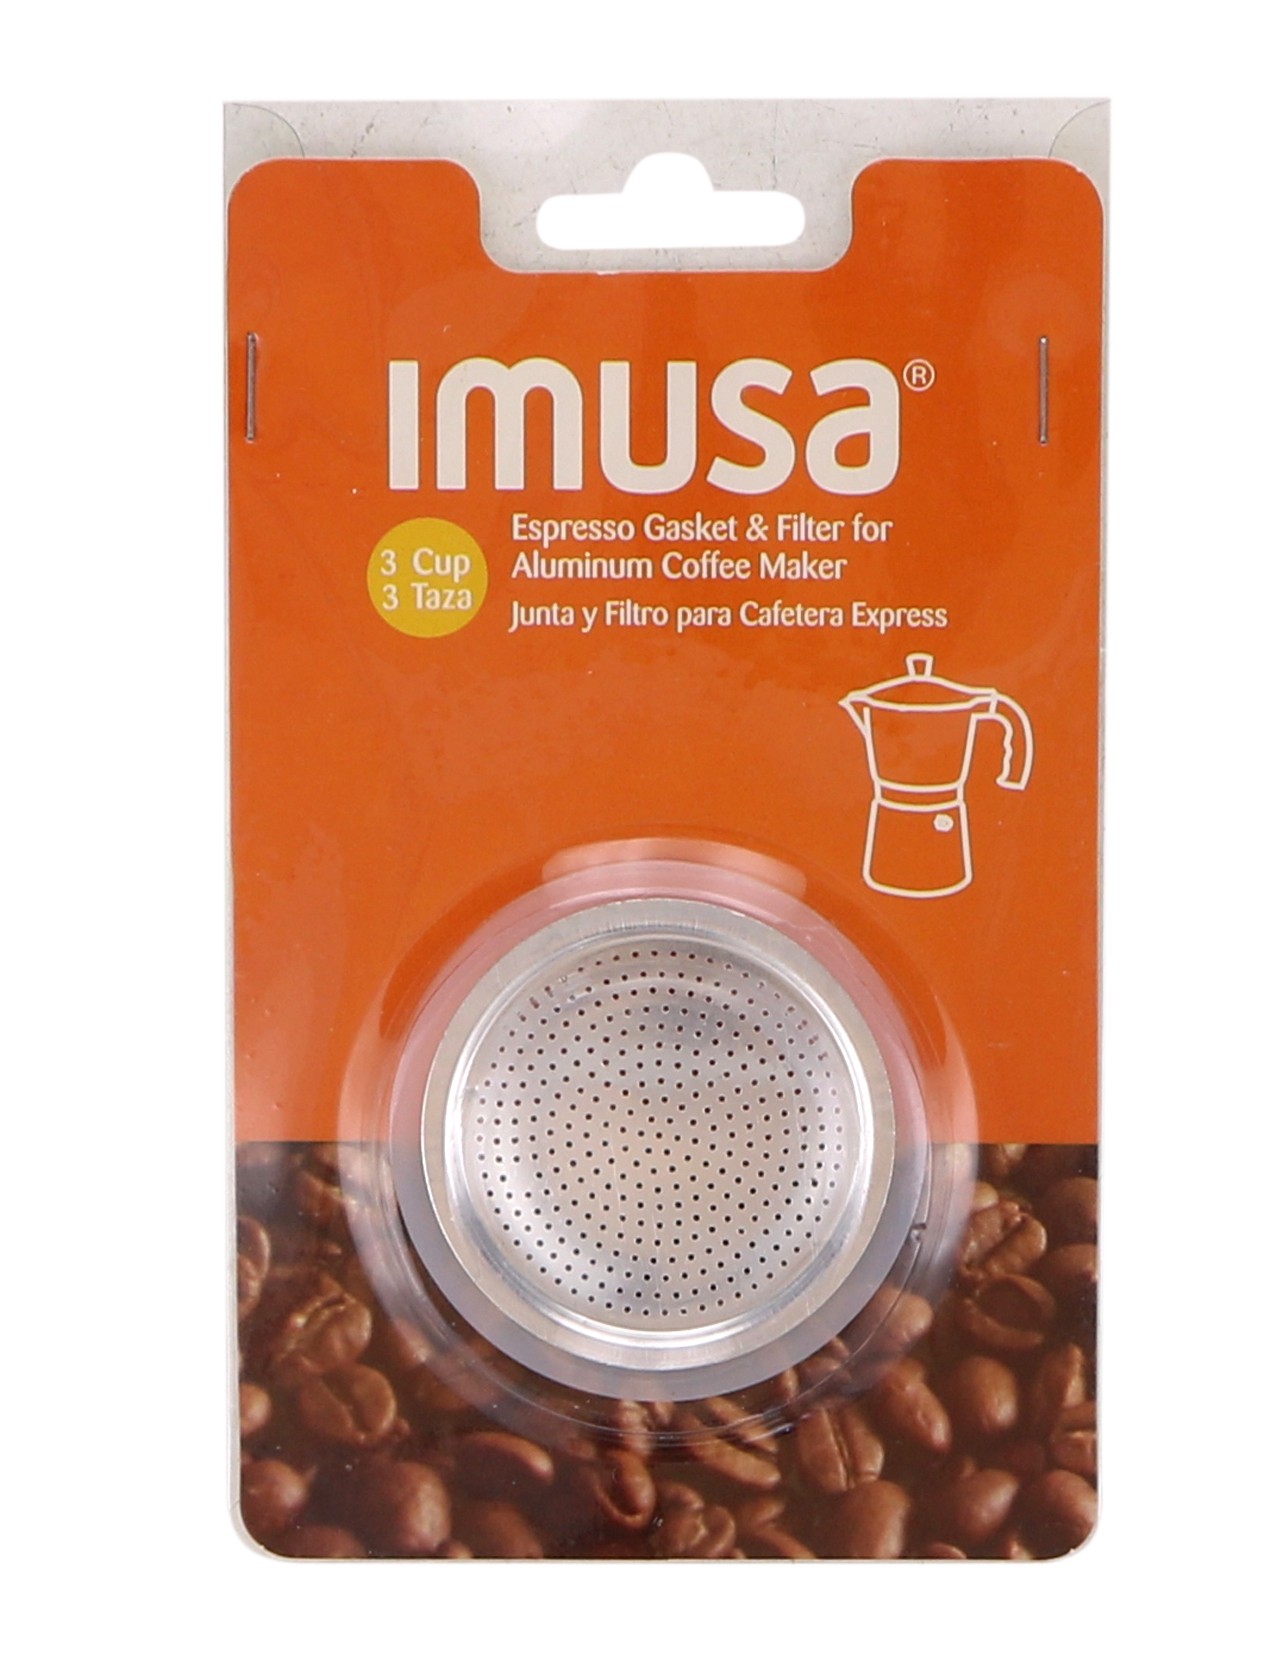 slide 1 of 1, Imusa 3 Cup Espresso Gasket & Filter For Aluminum Coffee Maker, 3 cups